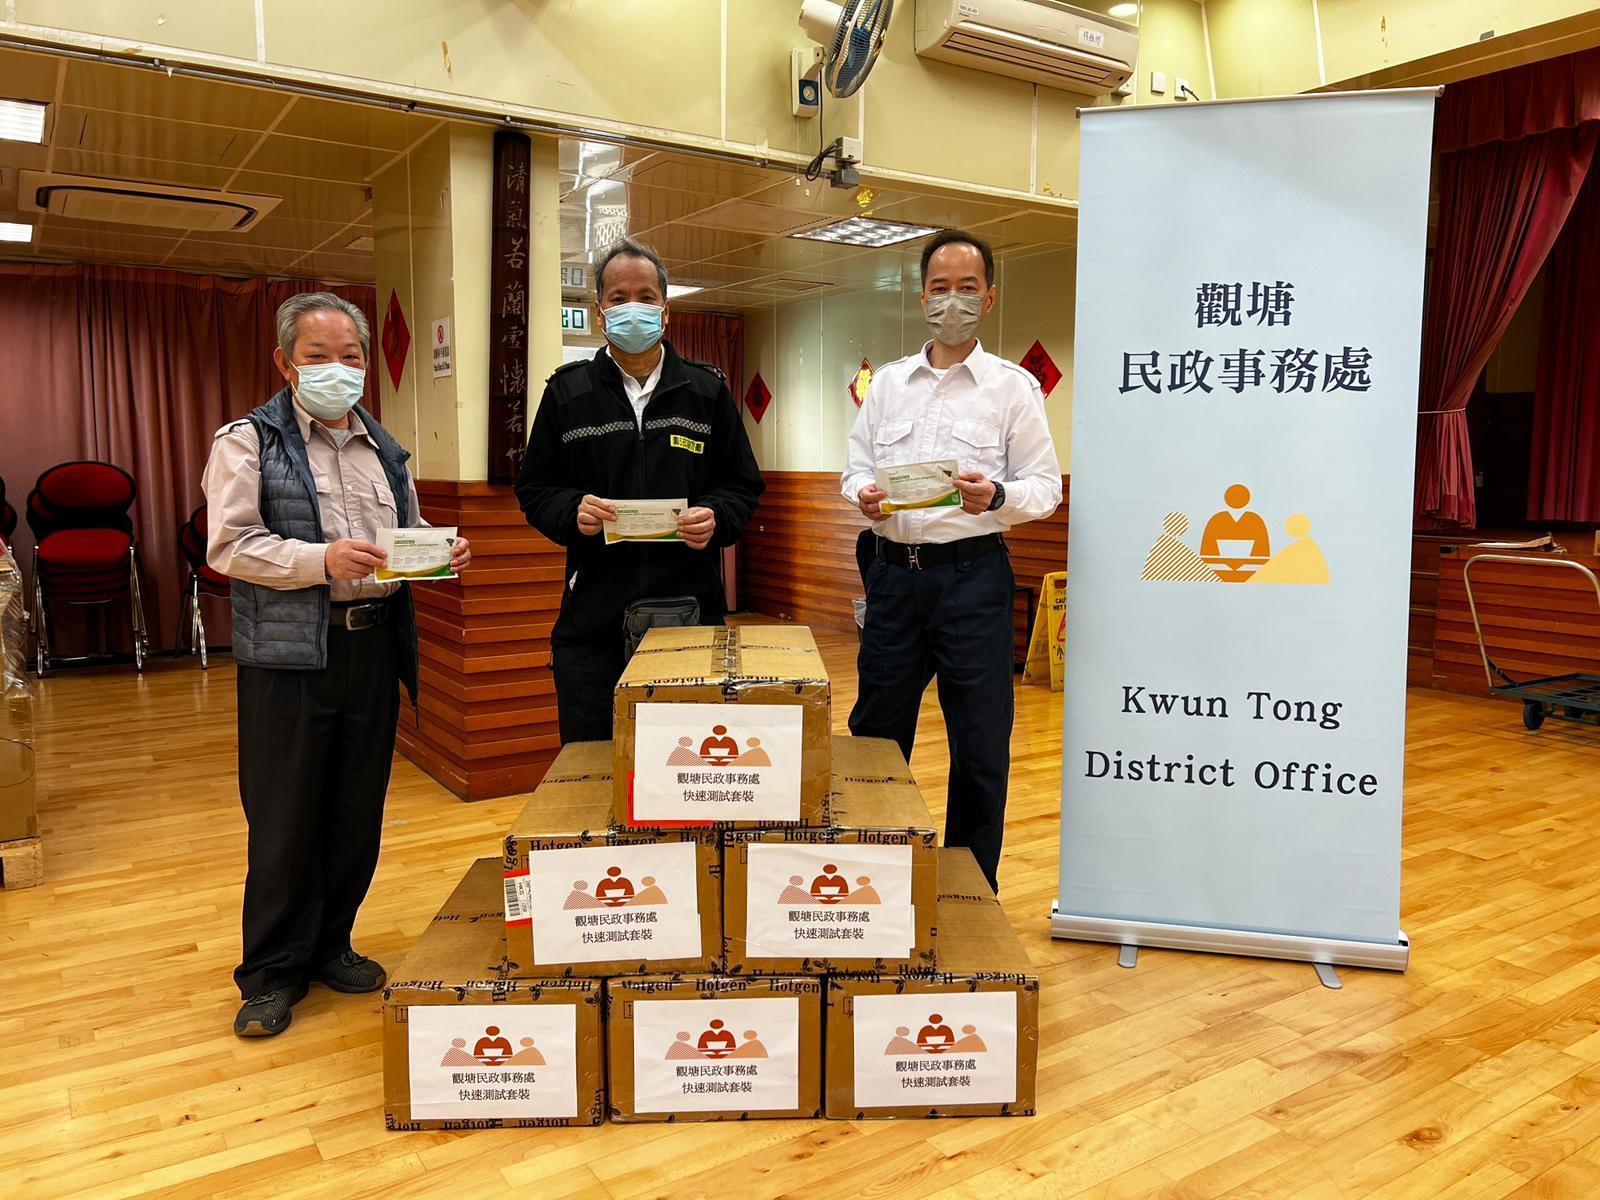 The Kwun Tong District Office today (February 26) distributed COVID-19 rapid test kits to households, cleansing workers and property management staff living and working in Ming Tai House of On Tai Estate for voluntary testing through the property management company.